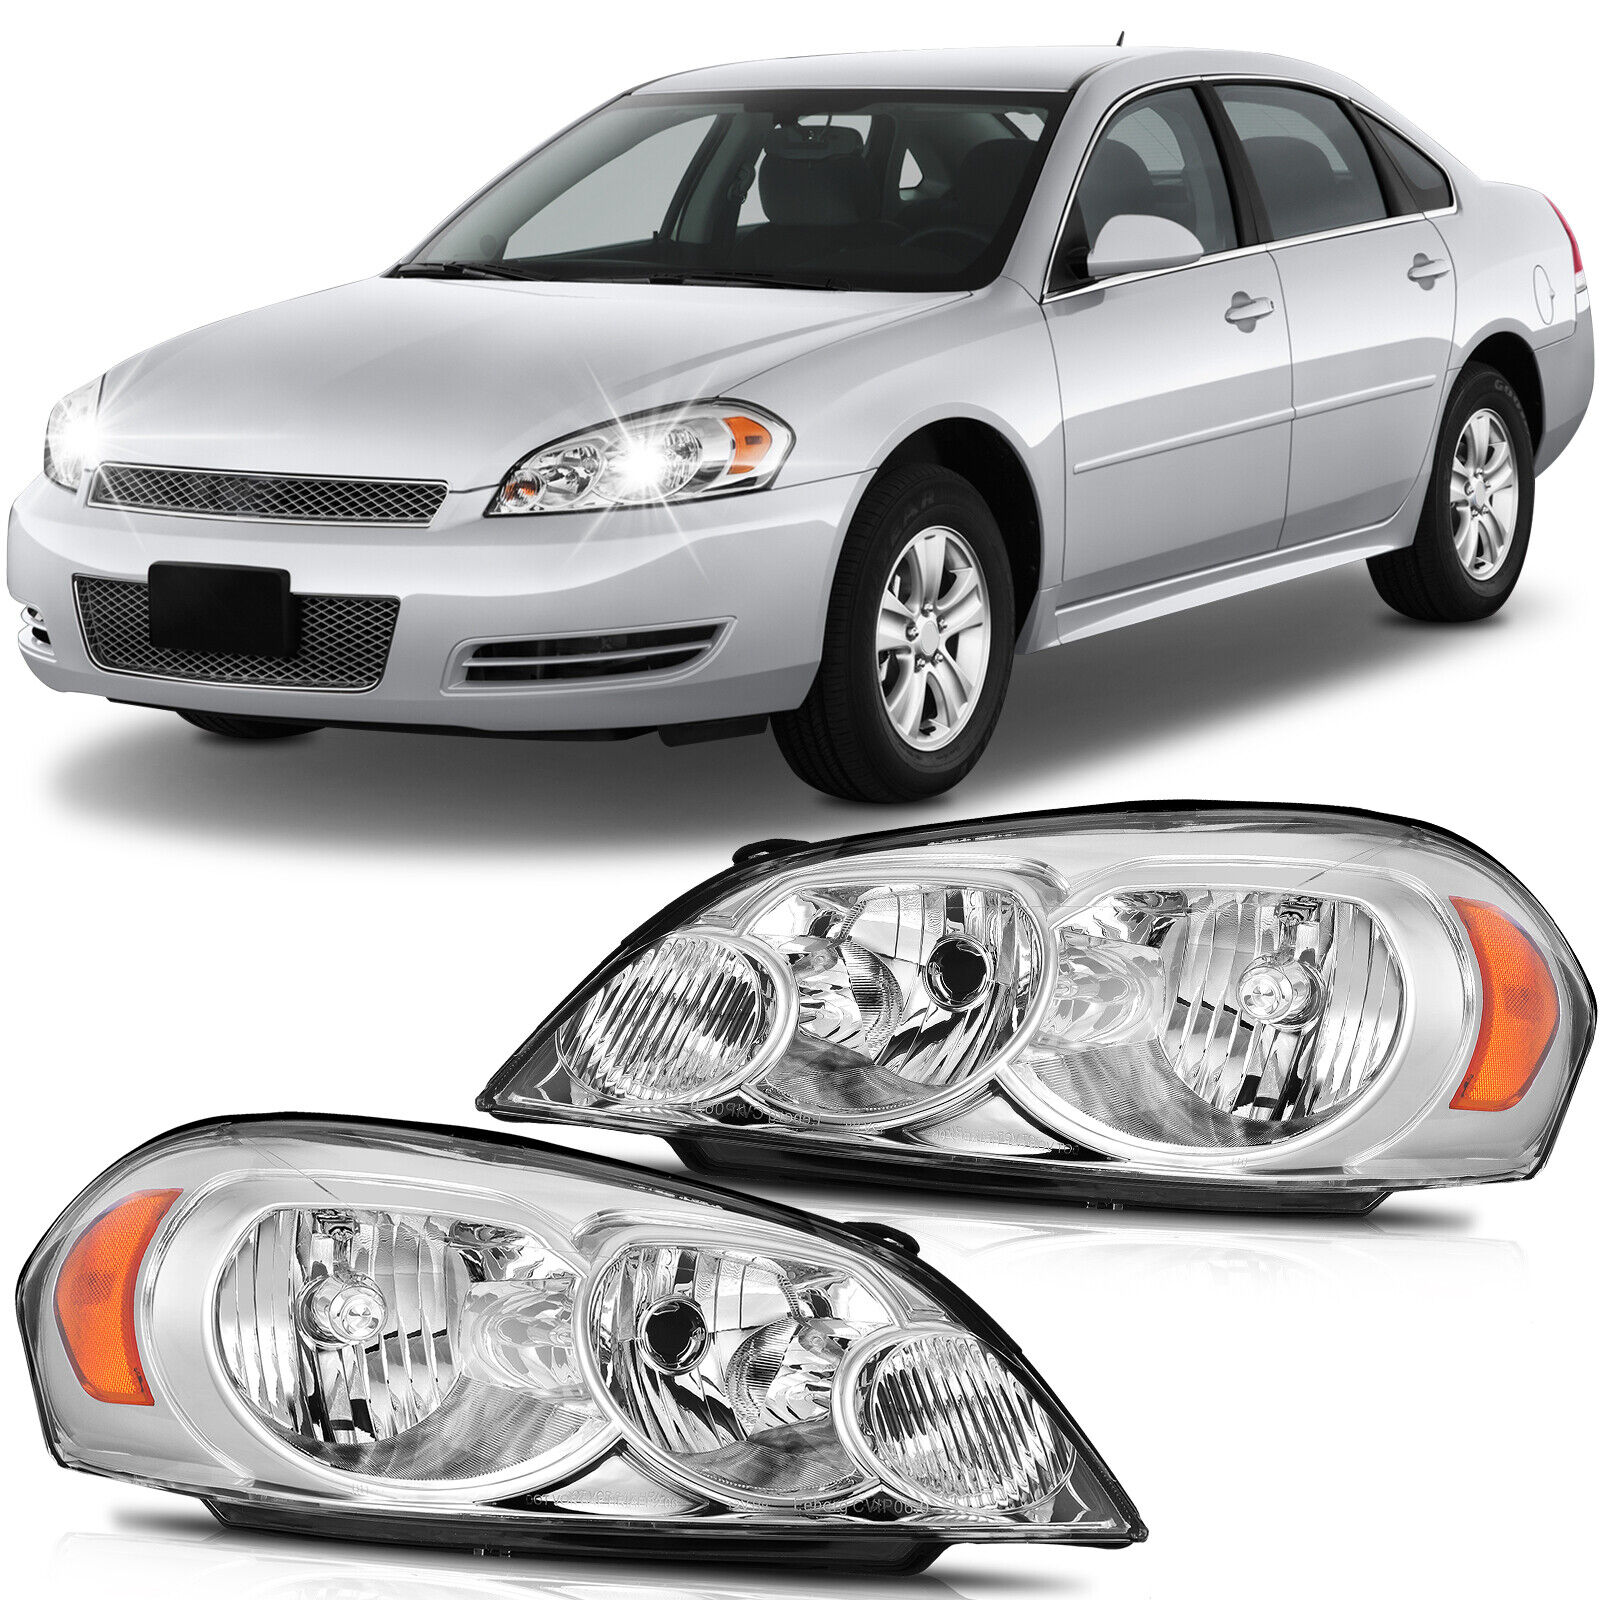 For 2006-2013 Chevrolet Impala Headlights Assembly Clear Lens w/Amber Pair